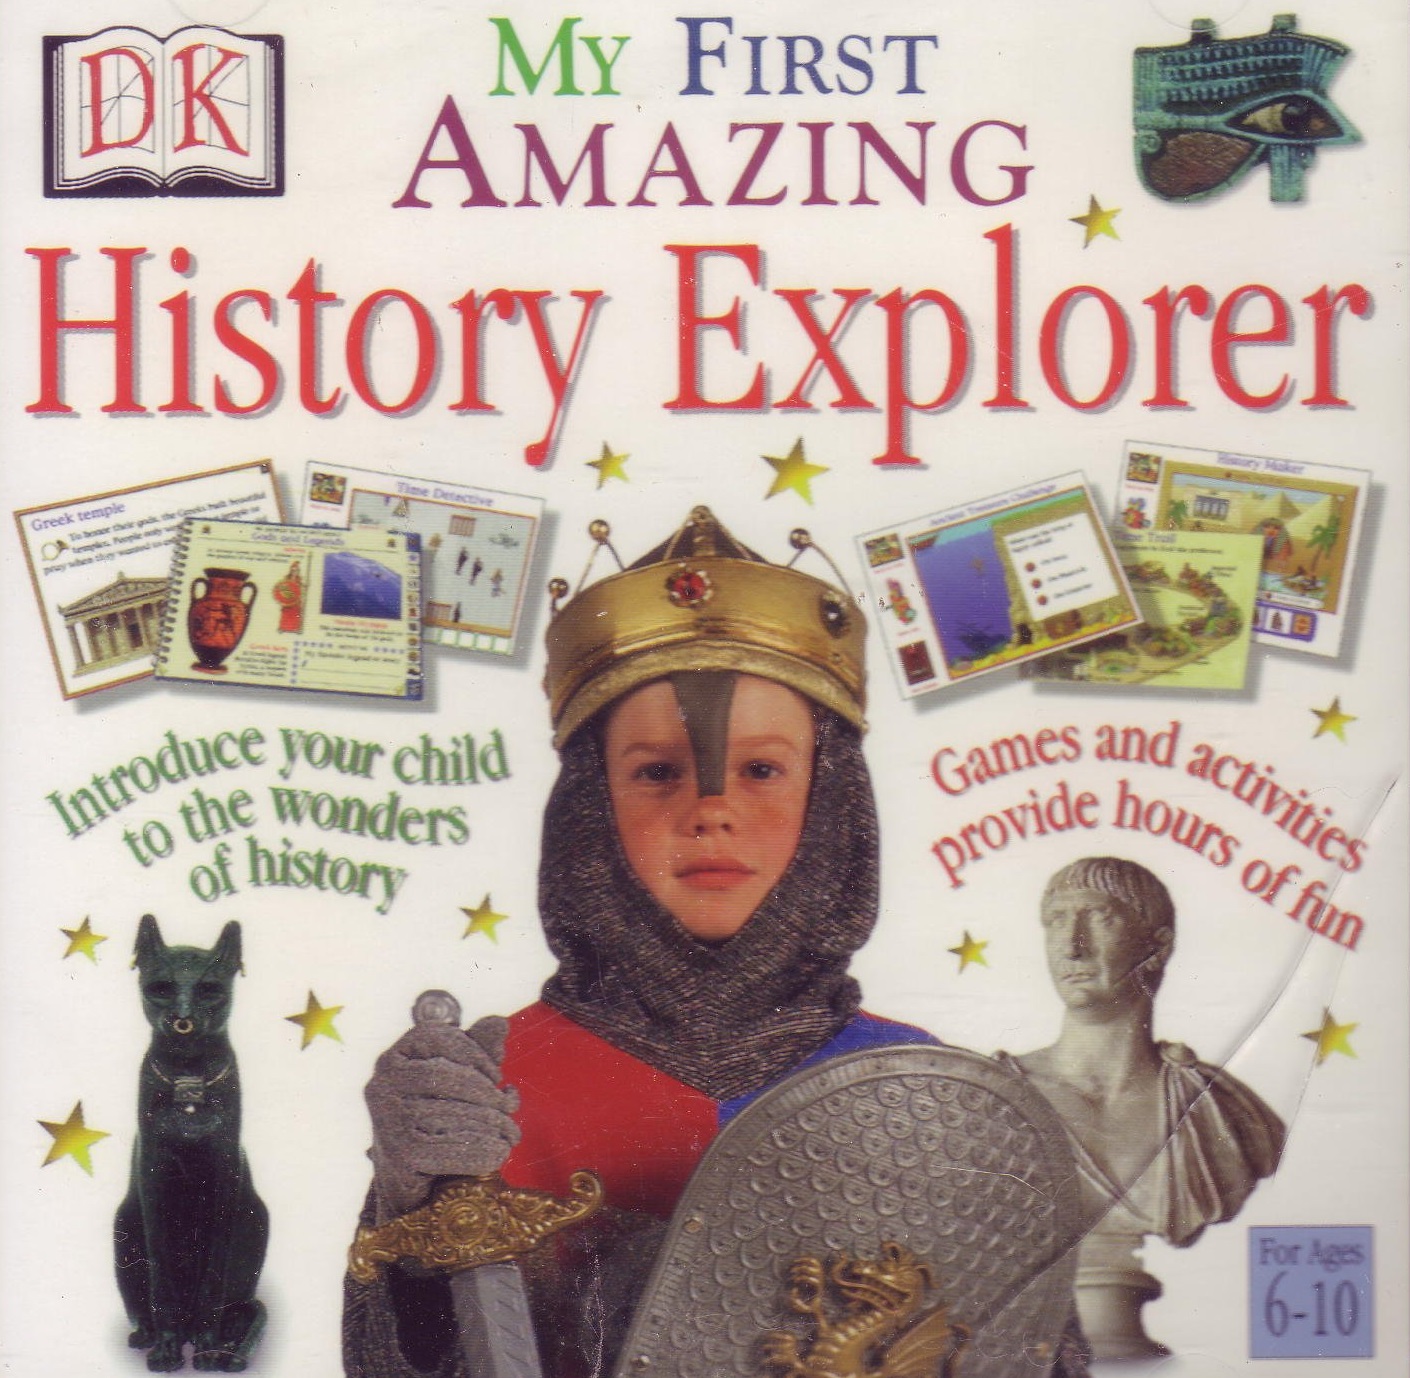 DK My First Amazing History Explorer PC Game Download Free Full Version